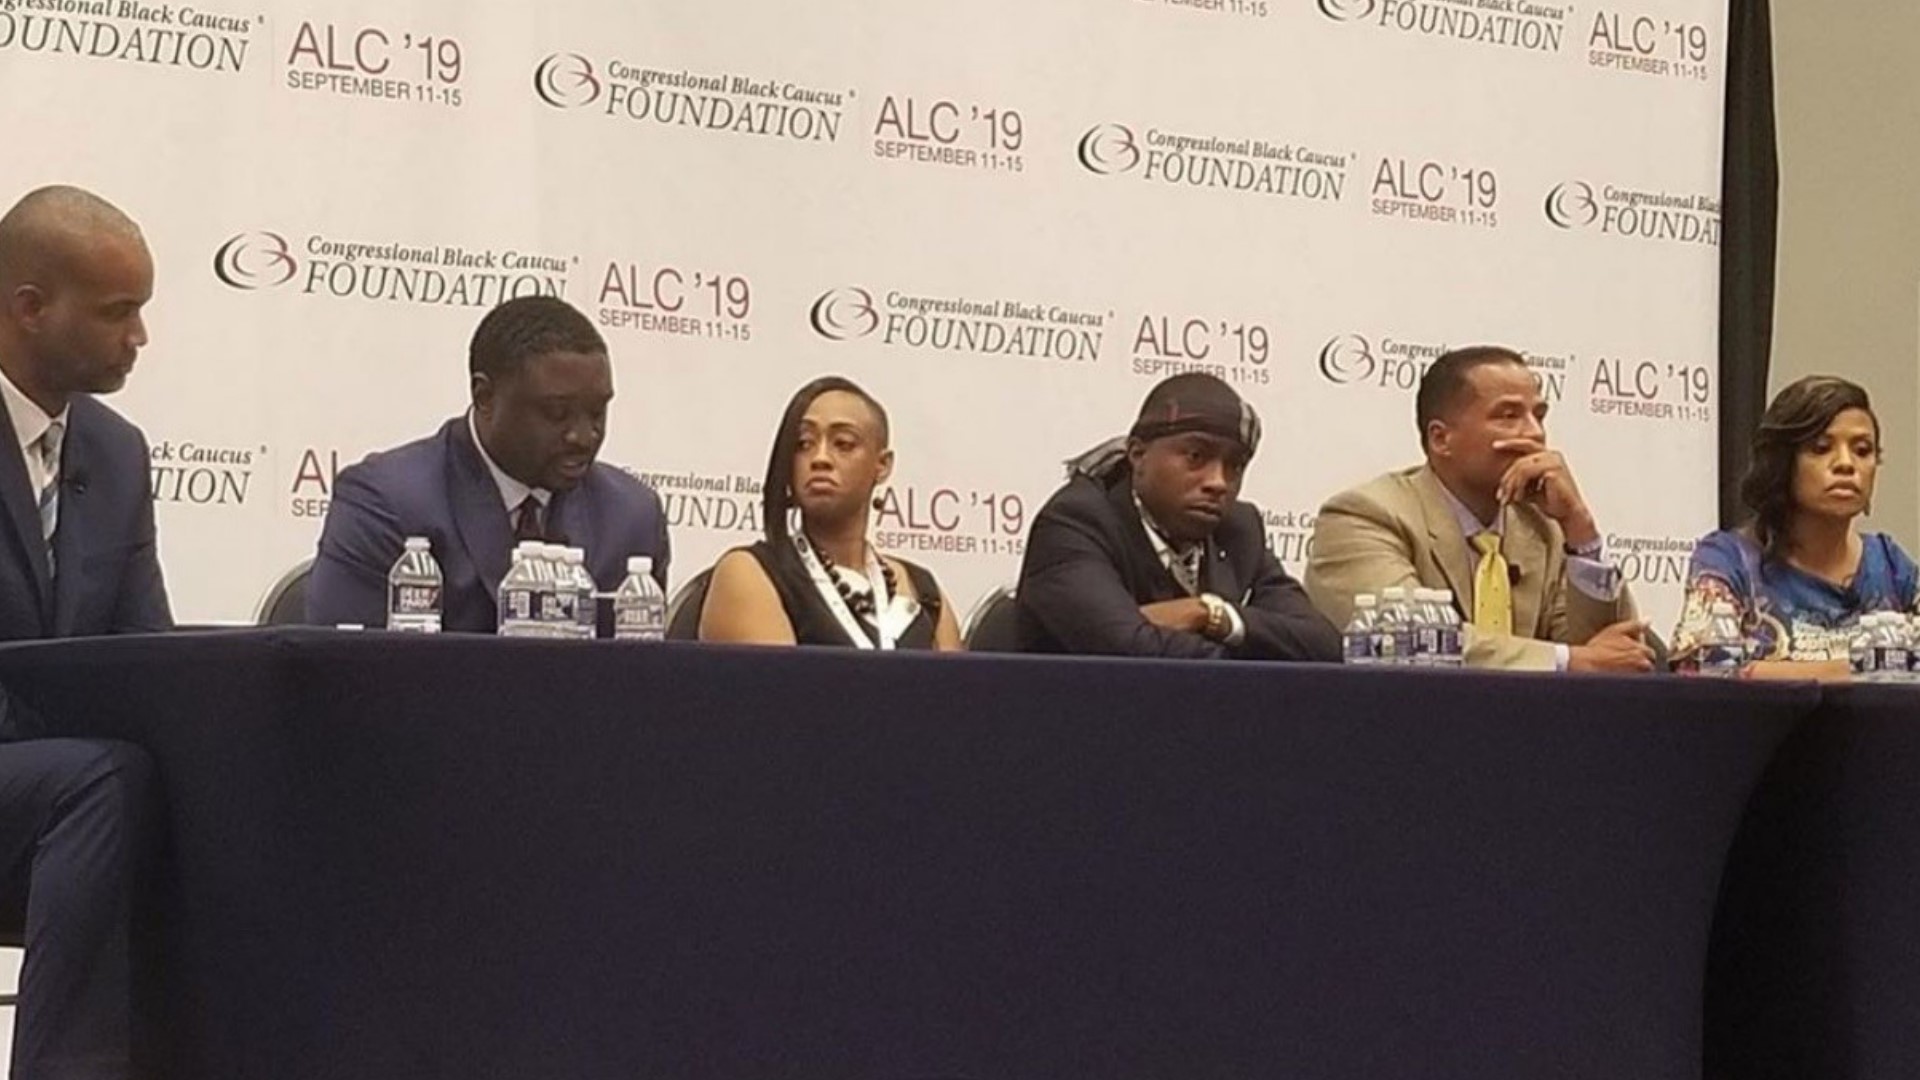 Stevante Clark traveled to our nation's capital with Police Chief Daniel Hahn for a congressional panel on bridging the gap between police and their communities.